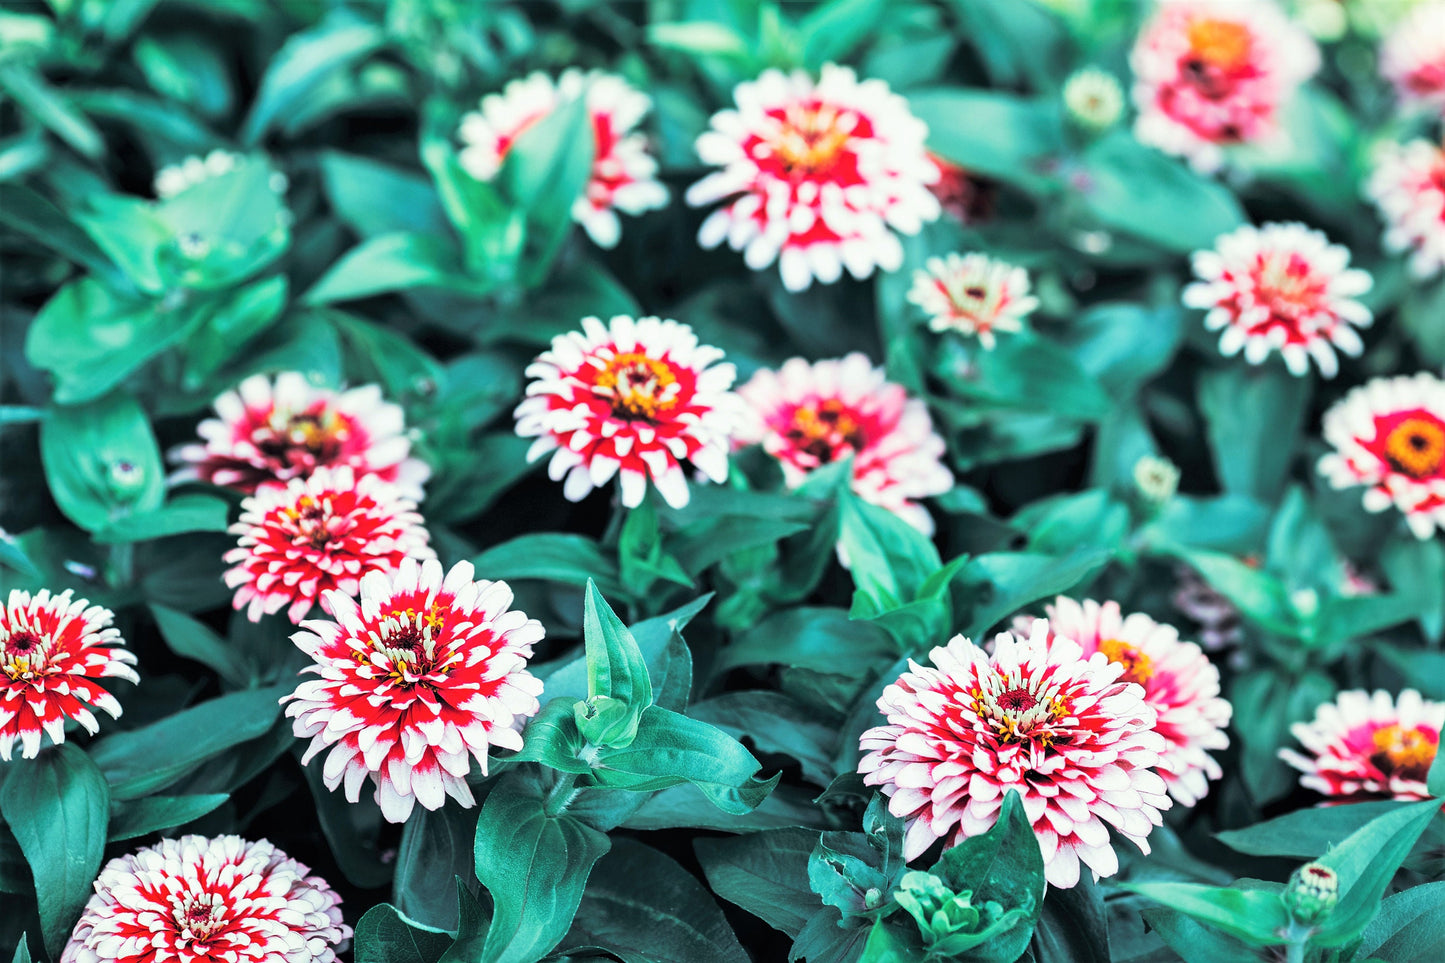 100 ICE QUEEN ZINNIA Elegans Bicolor Double Pink Red White Flower Seeds